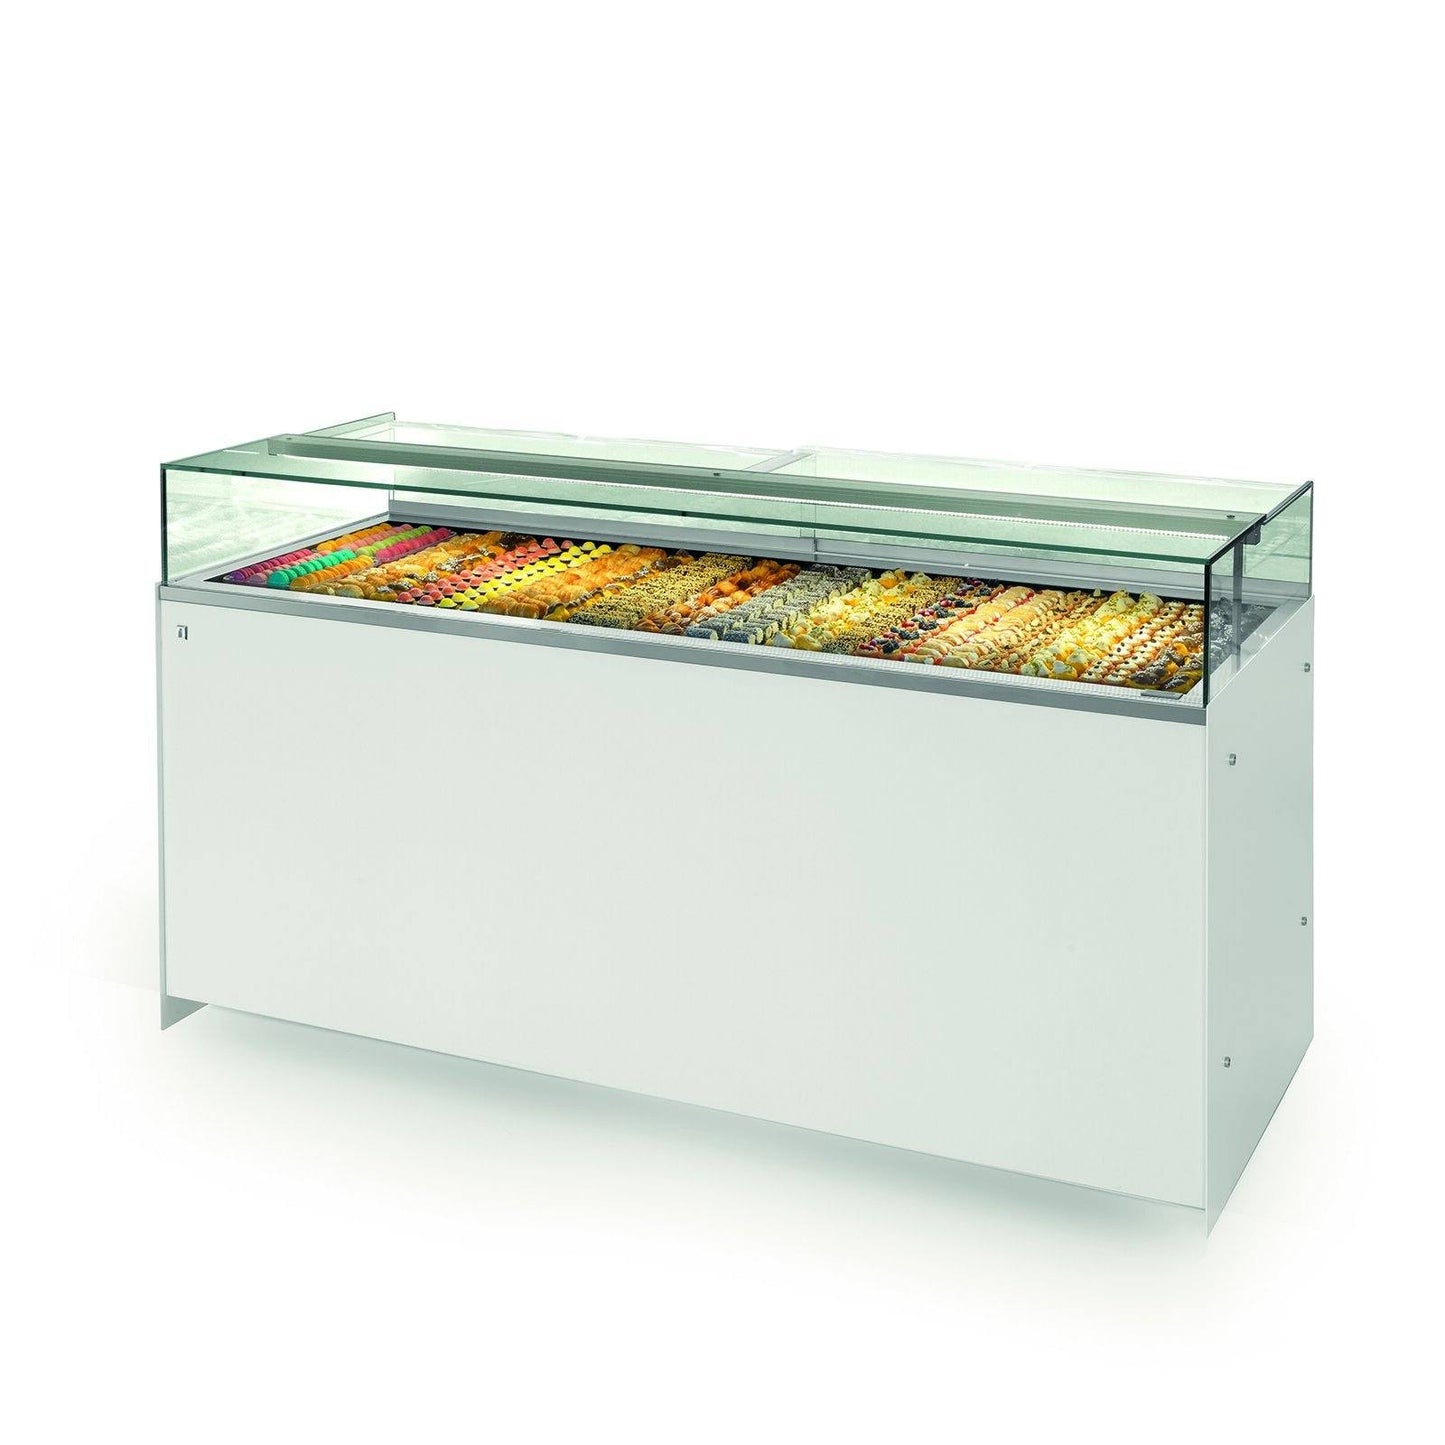 IFI Drop-In Delice Chocolate/Pastry Display Case